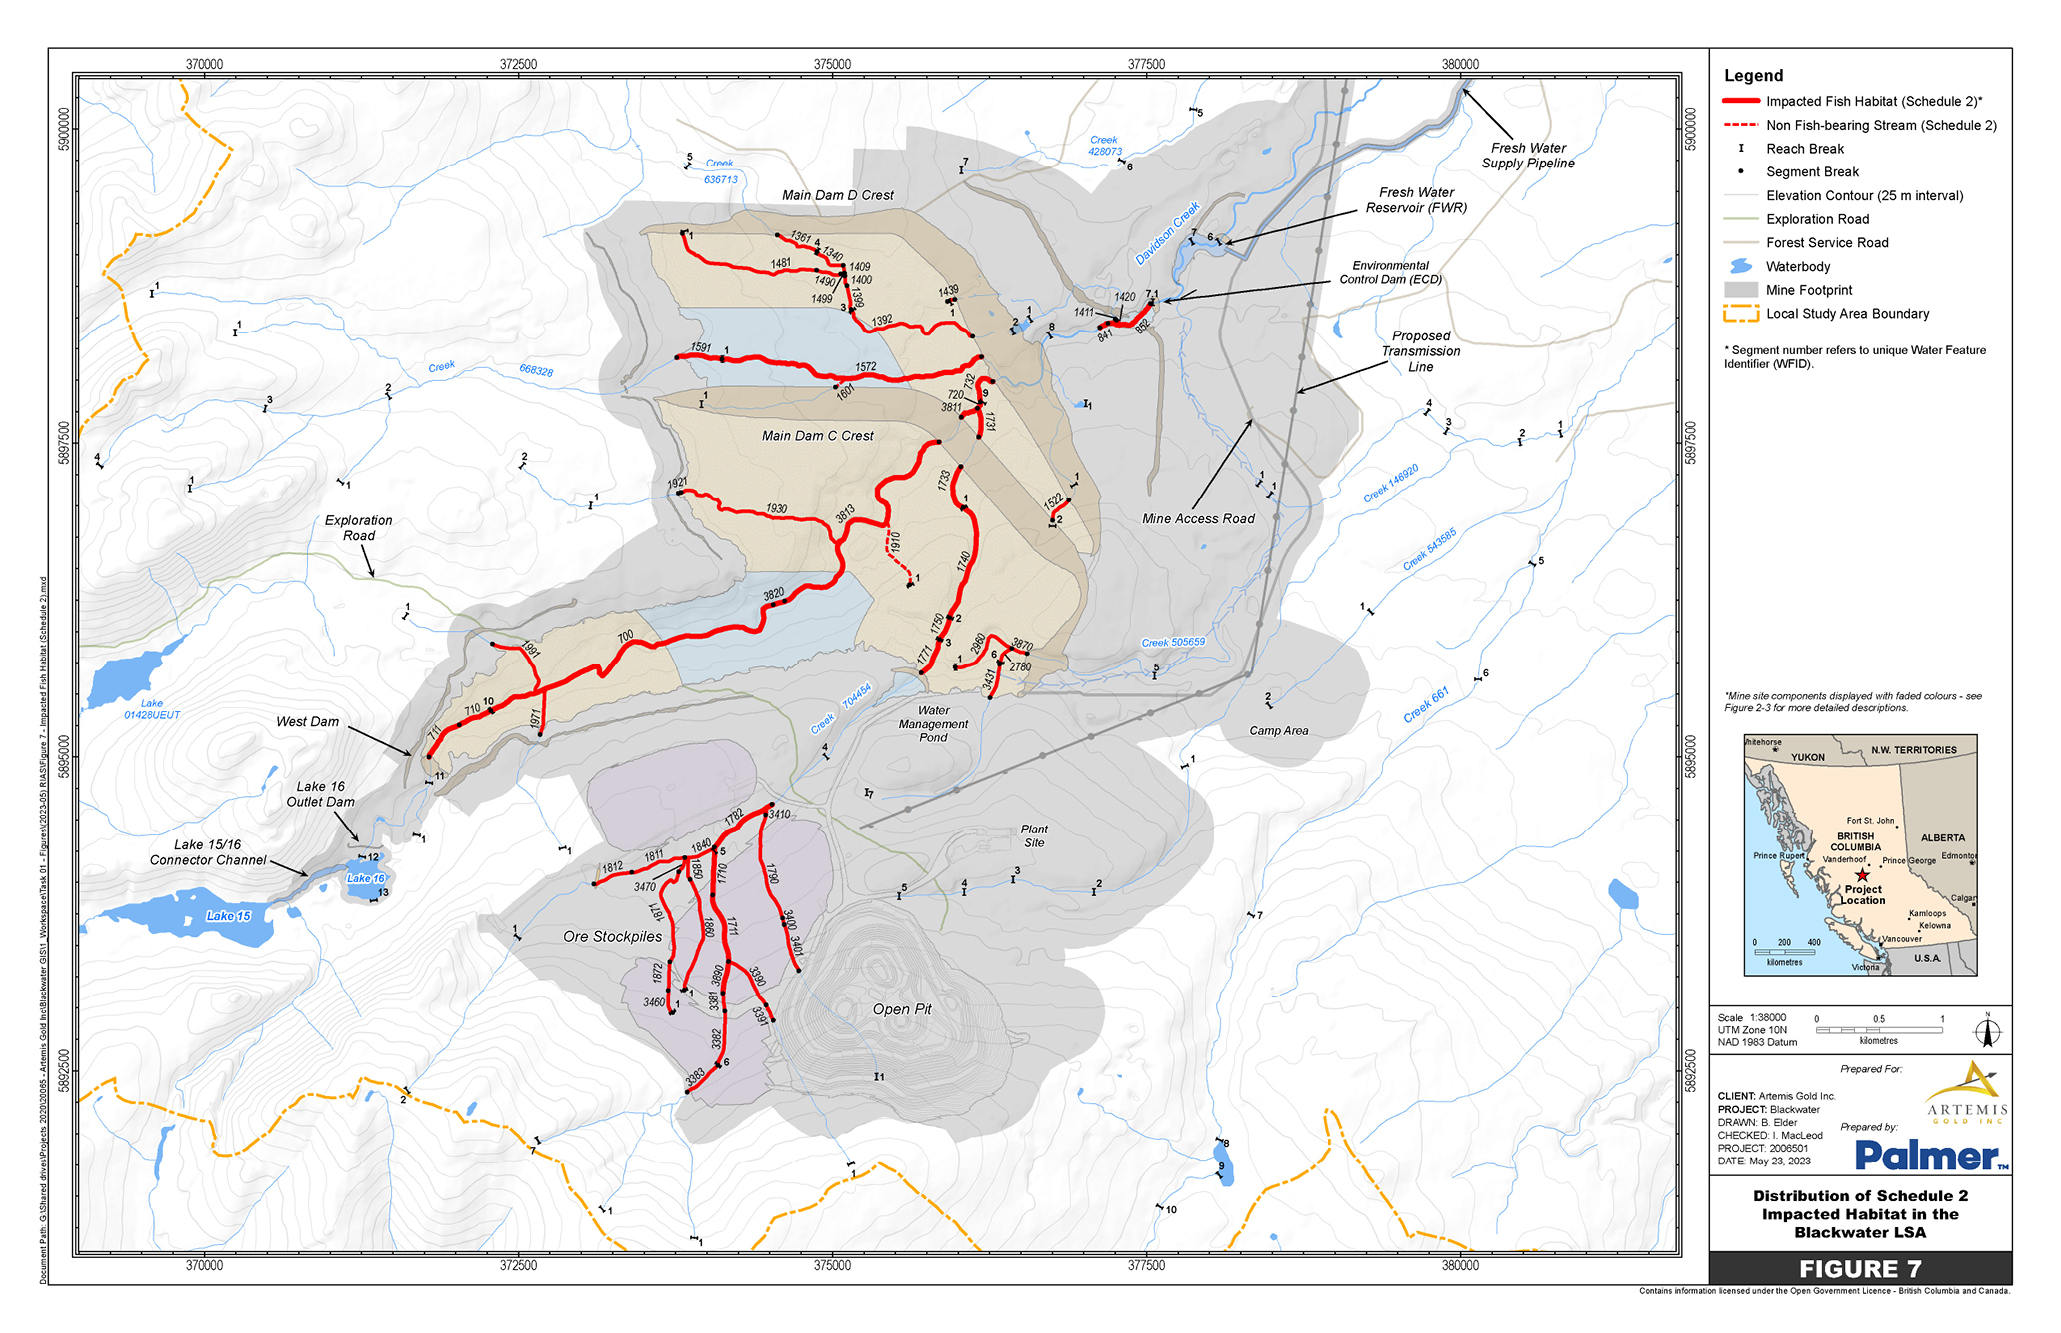 A 1:38,000 scale map shows the location of the impacted water bodies at the mine site, in British Columbia, to be listed in Schedule 2 of the MDMER – Text version below the image